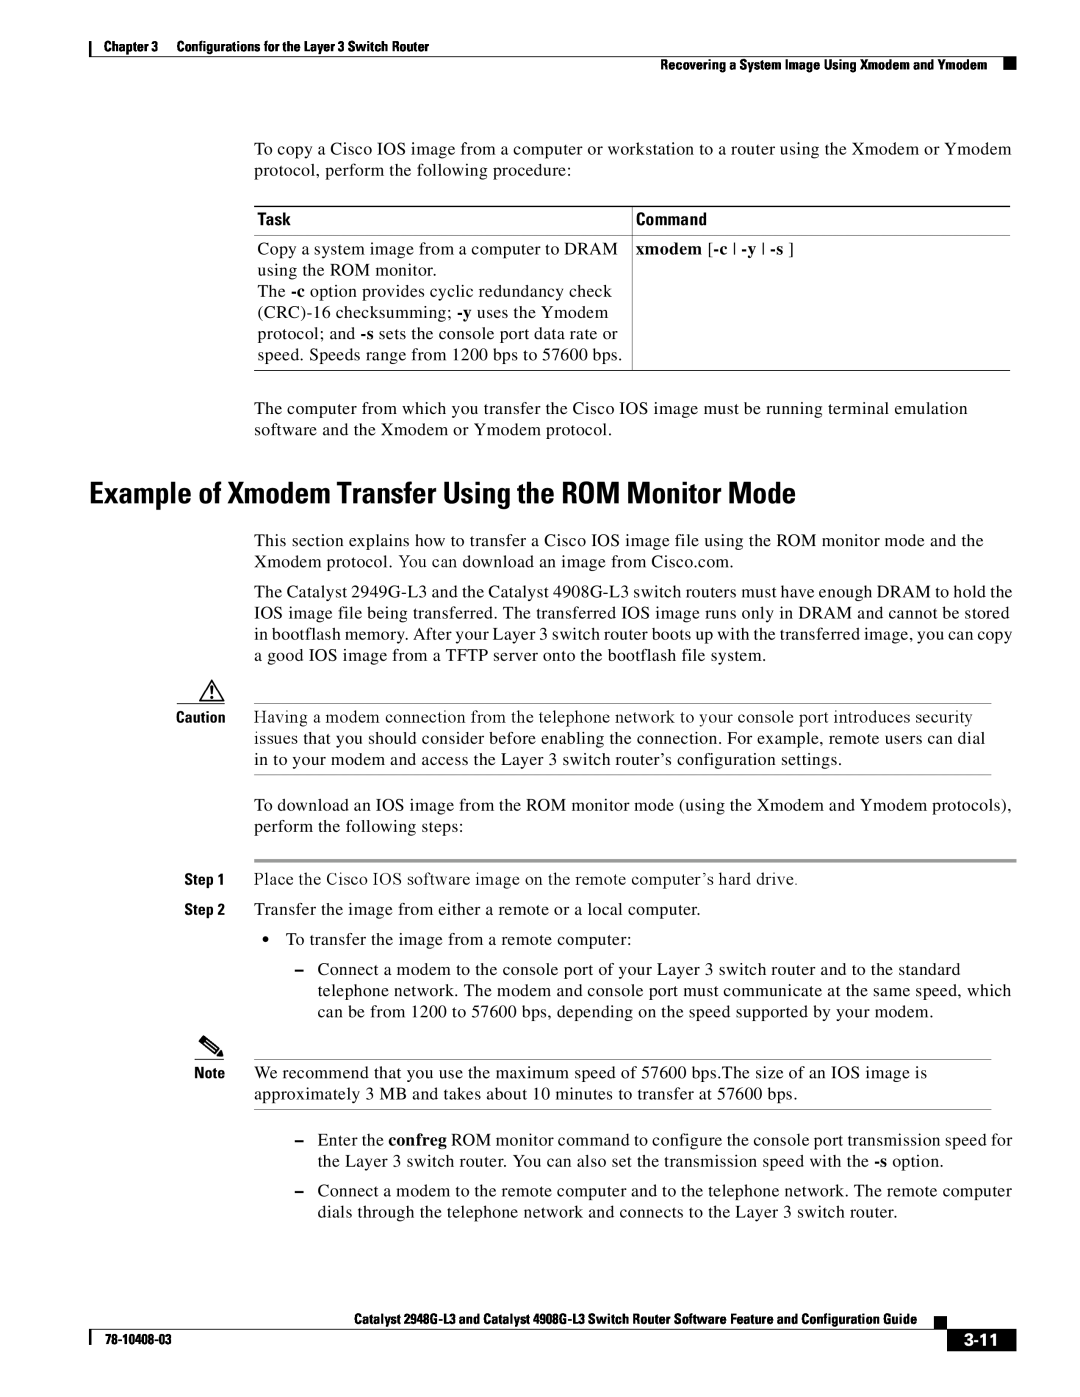 Cisco Systems 2948G-L3 manual Example of Xmodem Transfer Using the ROM Monitor Mode, Task, xmodem -c -y -s, 3-11, Command 